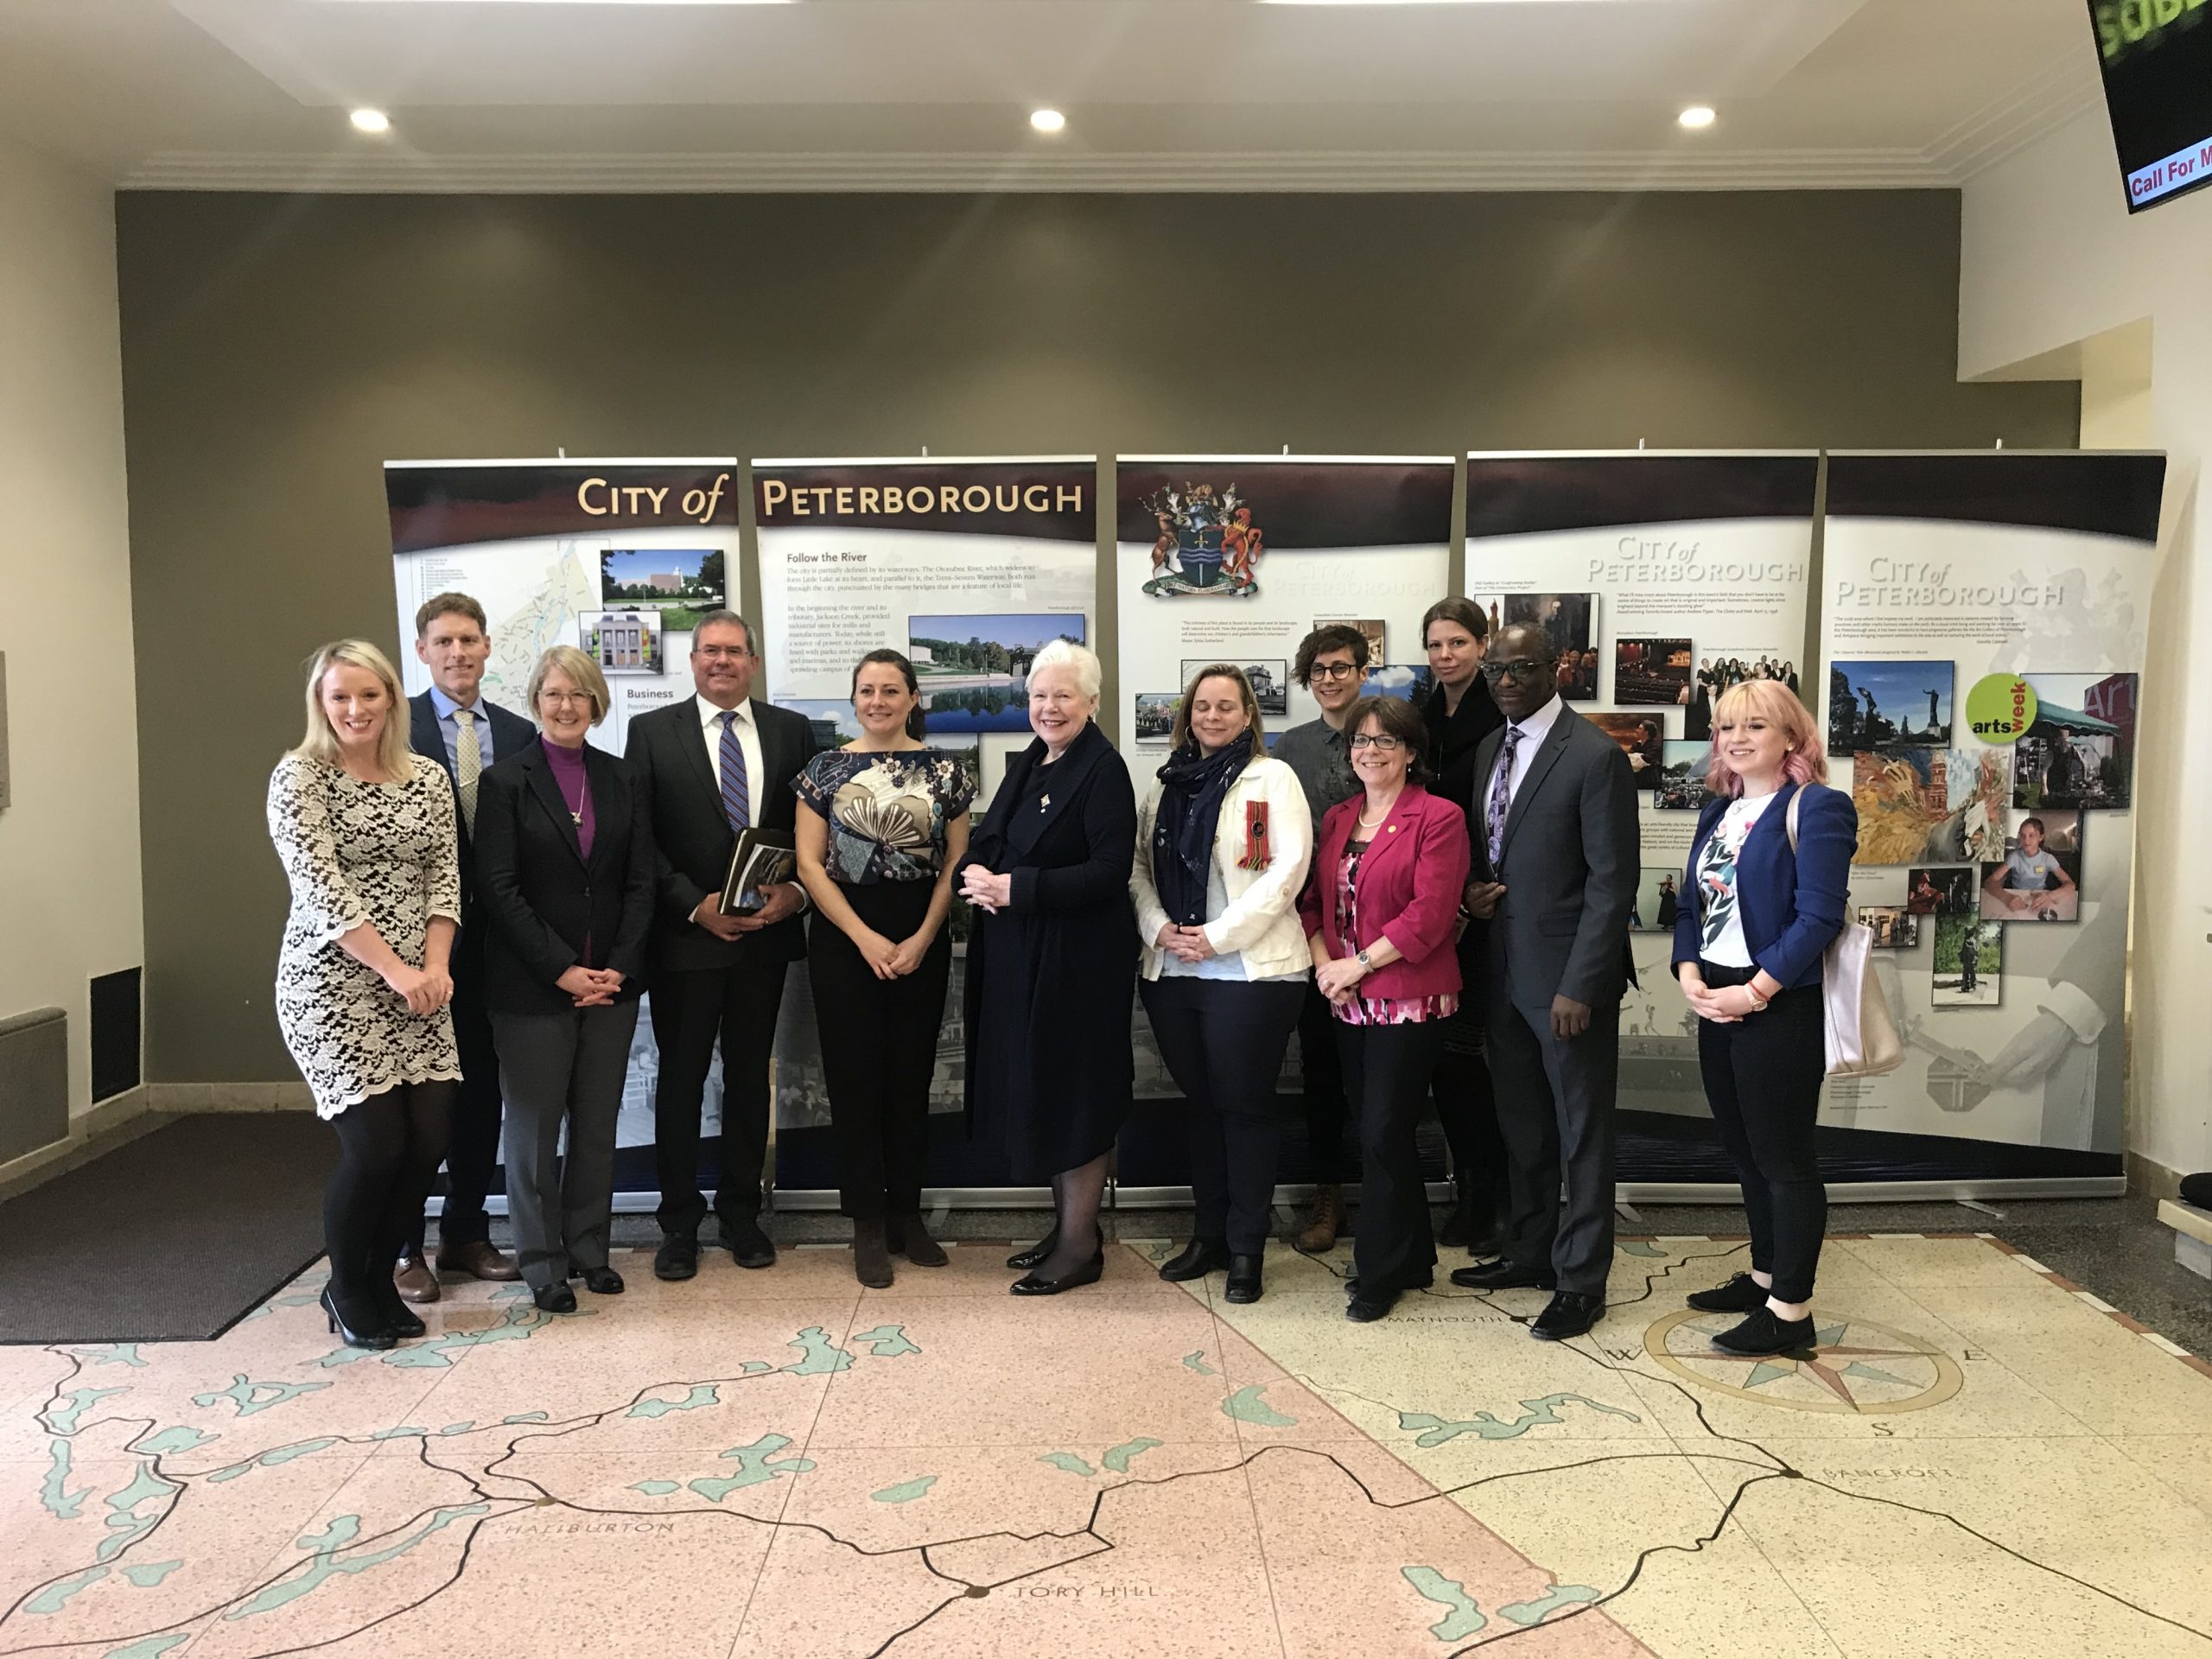 The Lieutenant Governor stands with the Mayor of Peterborough Diane Therrien along with staff in the foyer of Peterborough City Hall. The floor is a large map of the region.